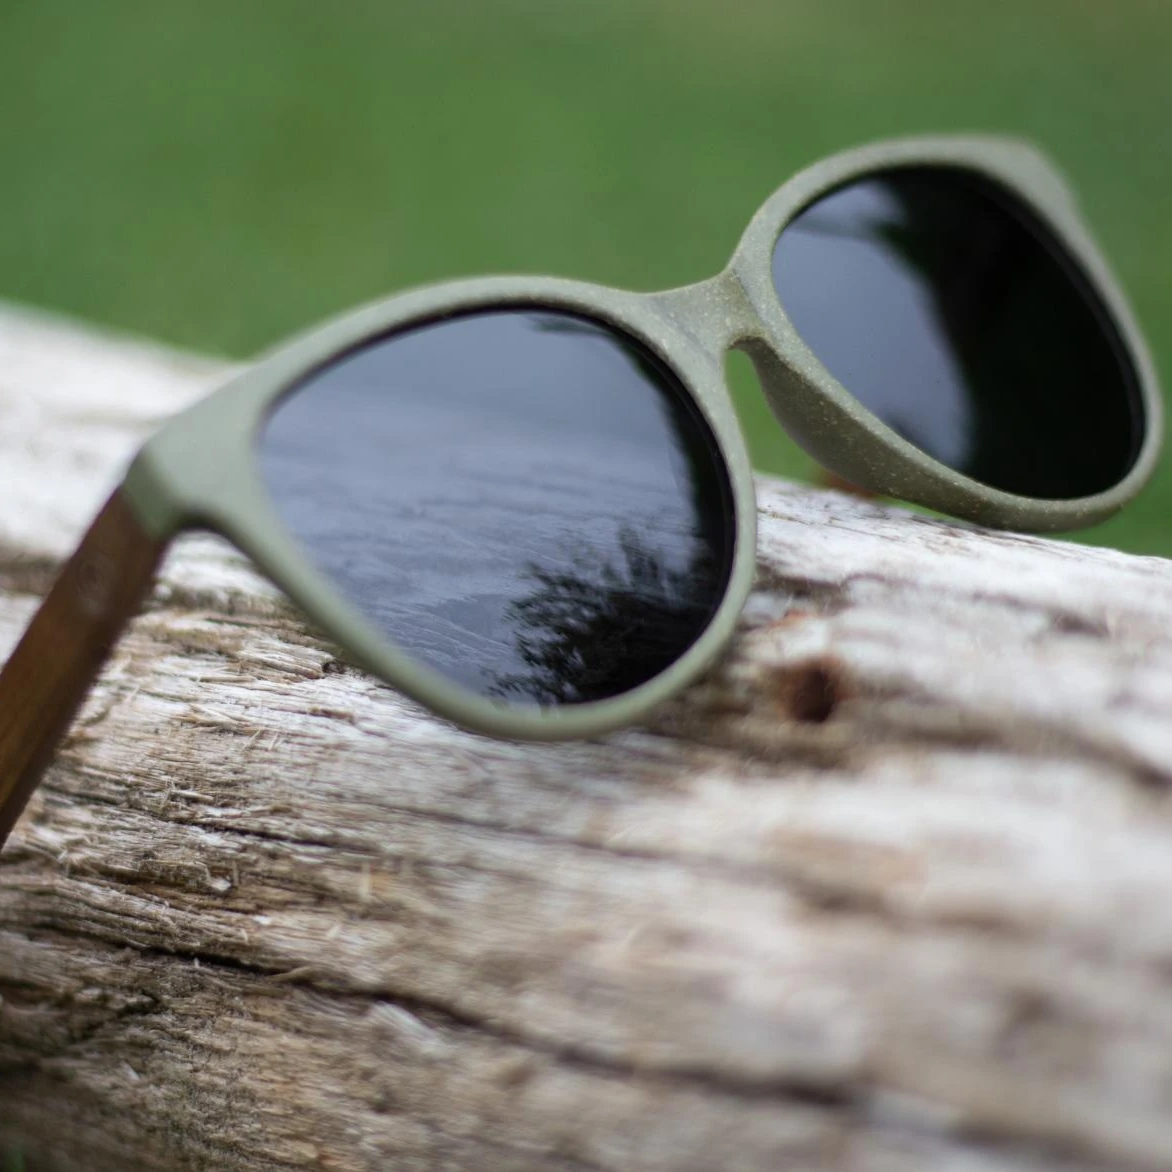 

factory manufacture Eco friendly recycled wheat straw fiber frame biodegradable wood temples arms polarized sunglasses